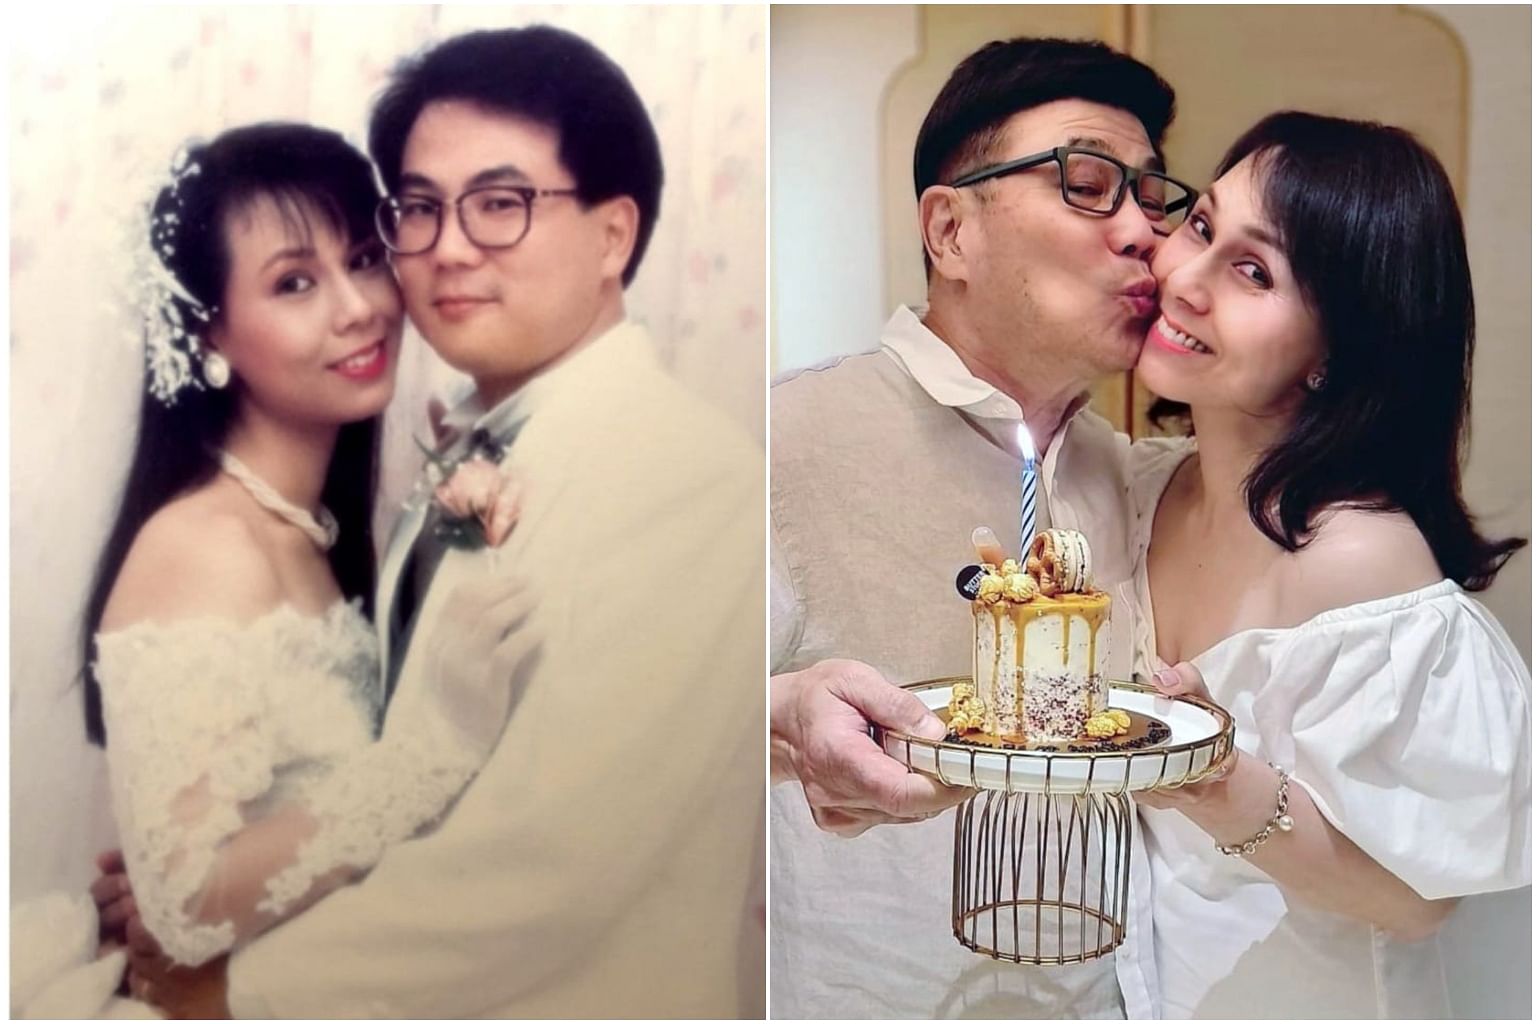 Actress Michele Reis as well as director Jack Neo share old wedding photos, Entertainment News & Top Stories